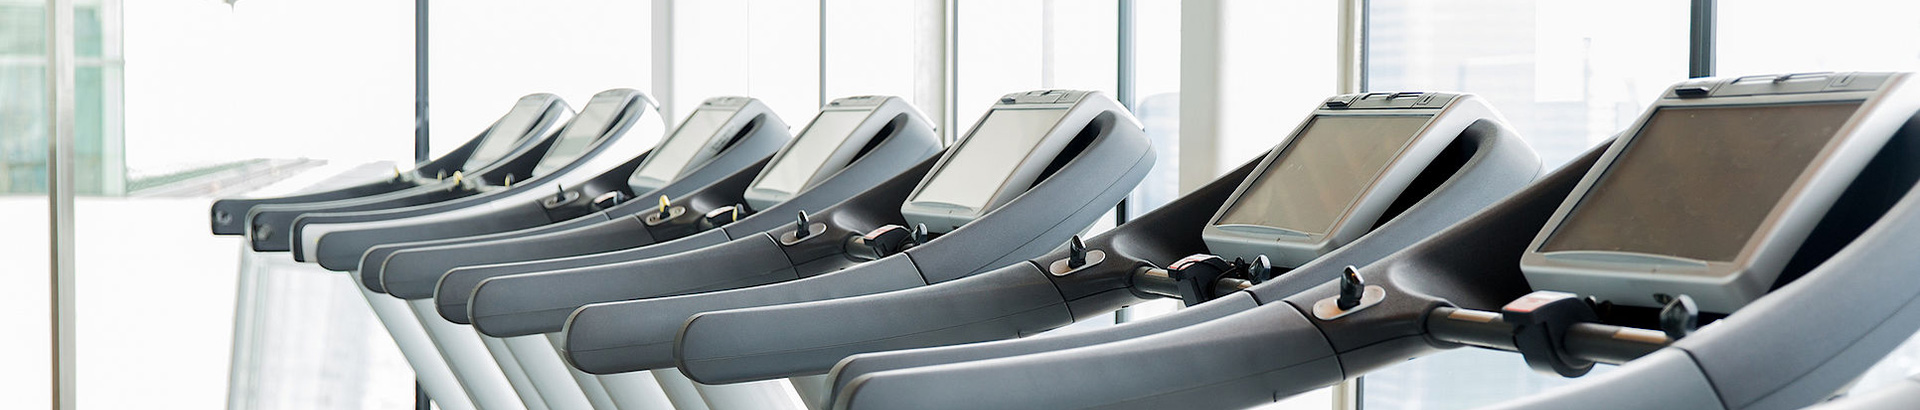 Trends of the Fitness Equipment Industry for the Next Decades